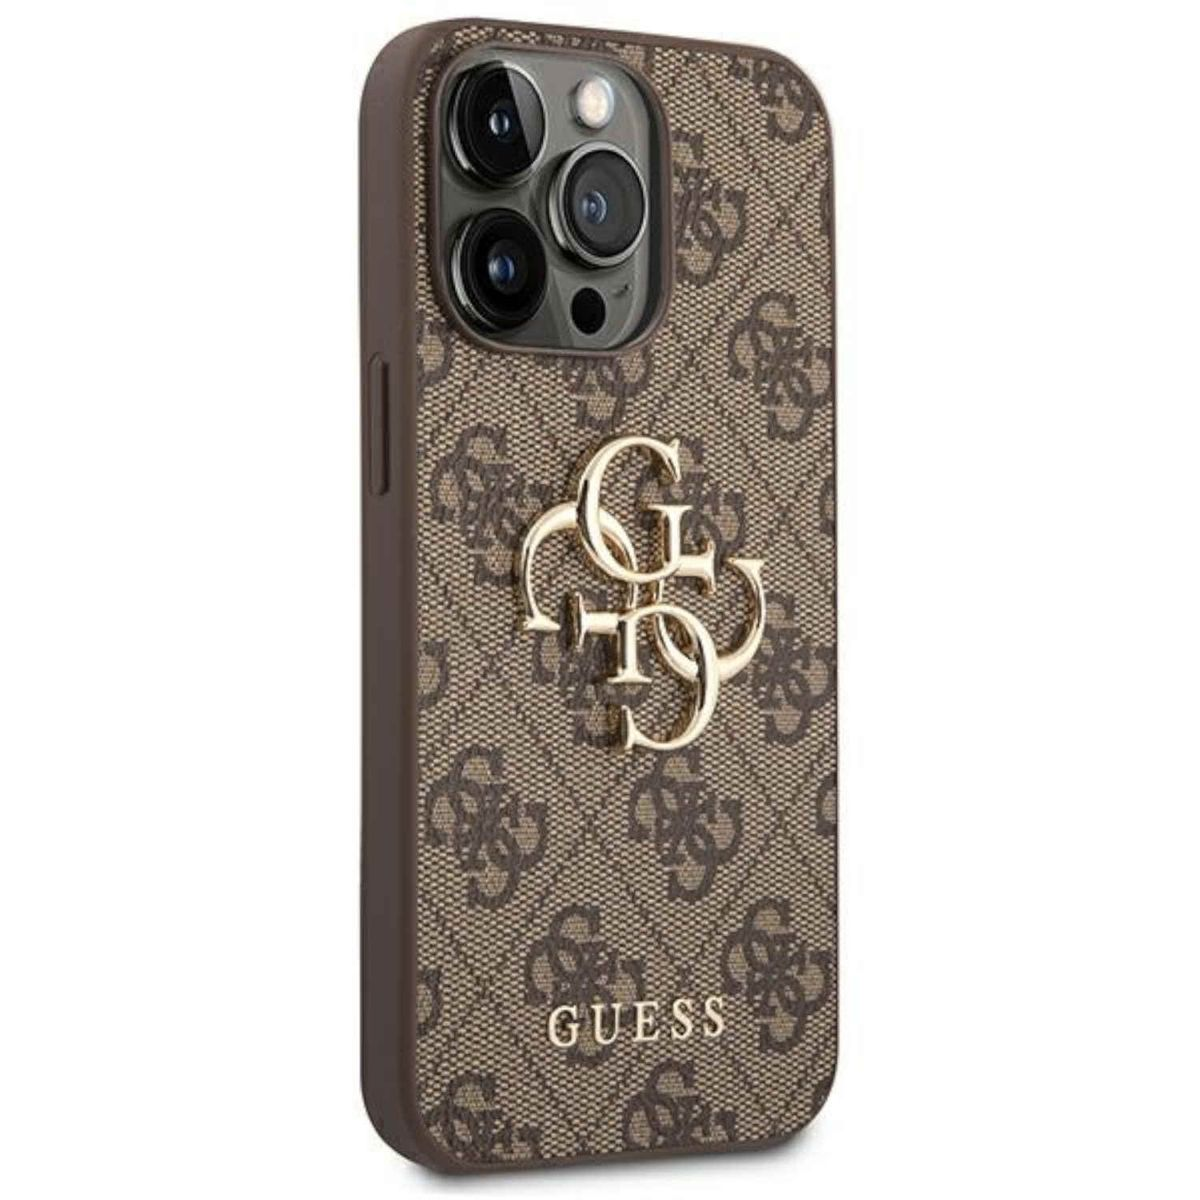 GUESS 4G Big Metal Logo Keine iPhone iPhone (Brown), 14 14 Backcover, Case Pro Apple, Angabe Pro